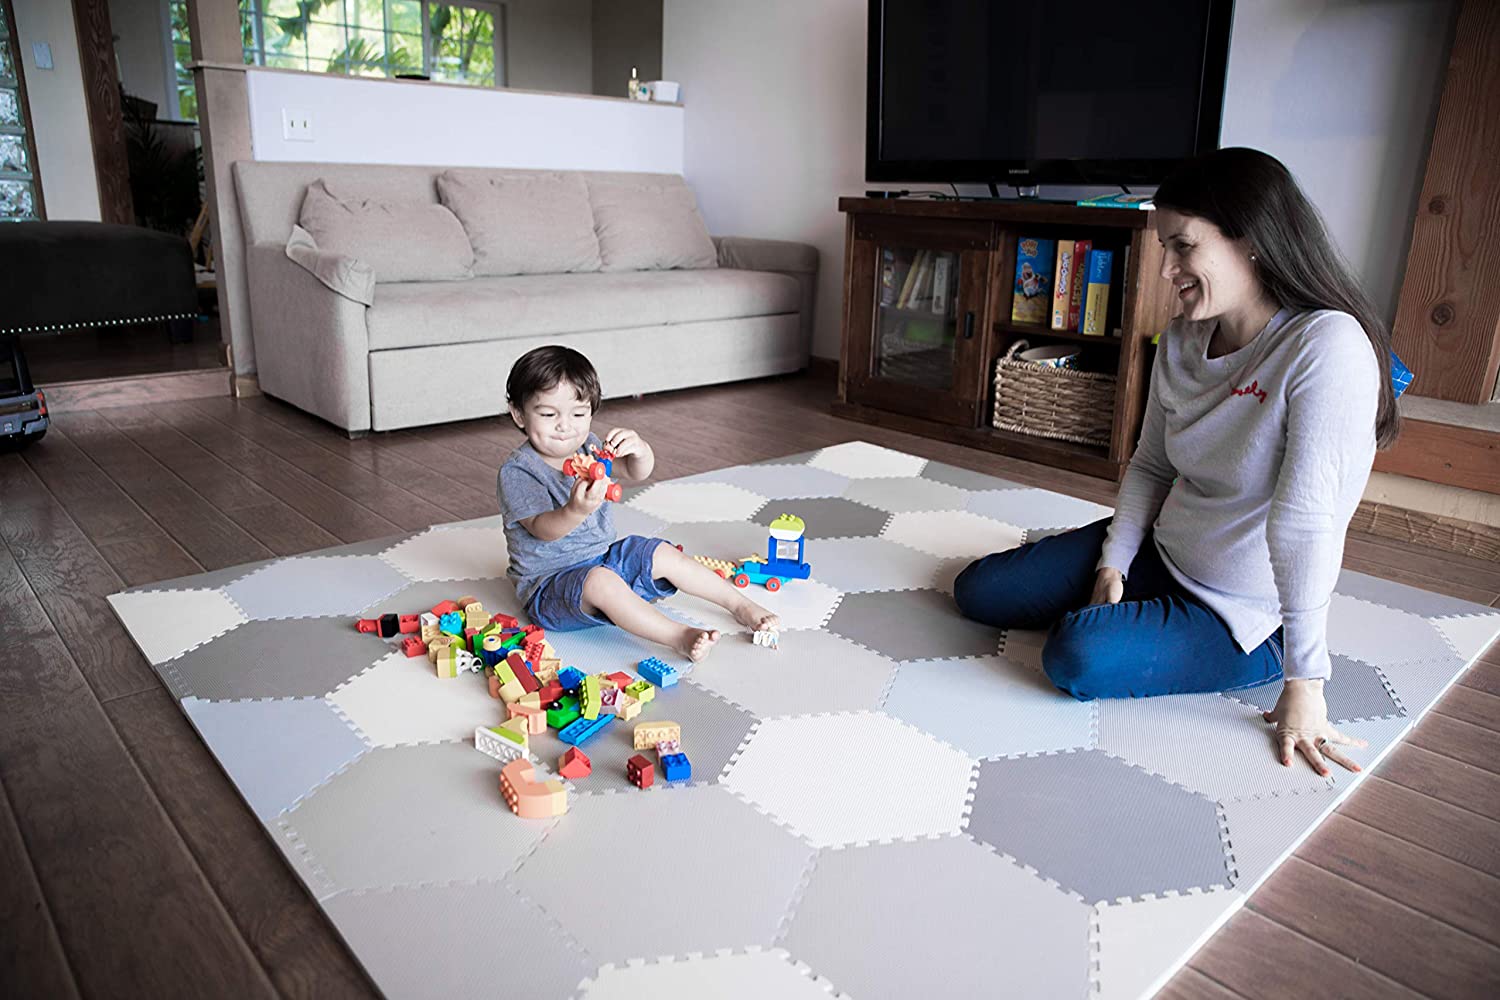 How Thick Should Interlocking Foam Floor Mats Be For Kids?